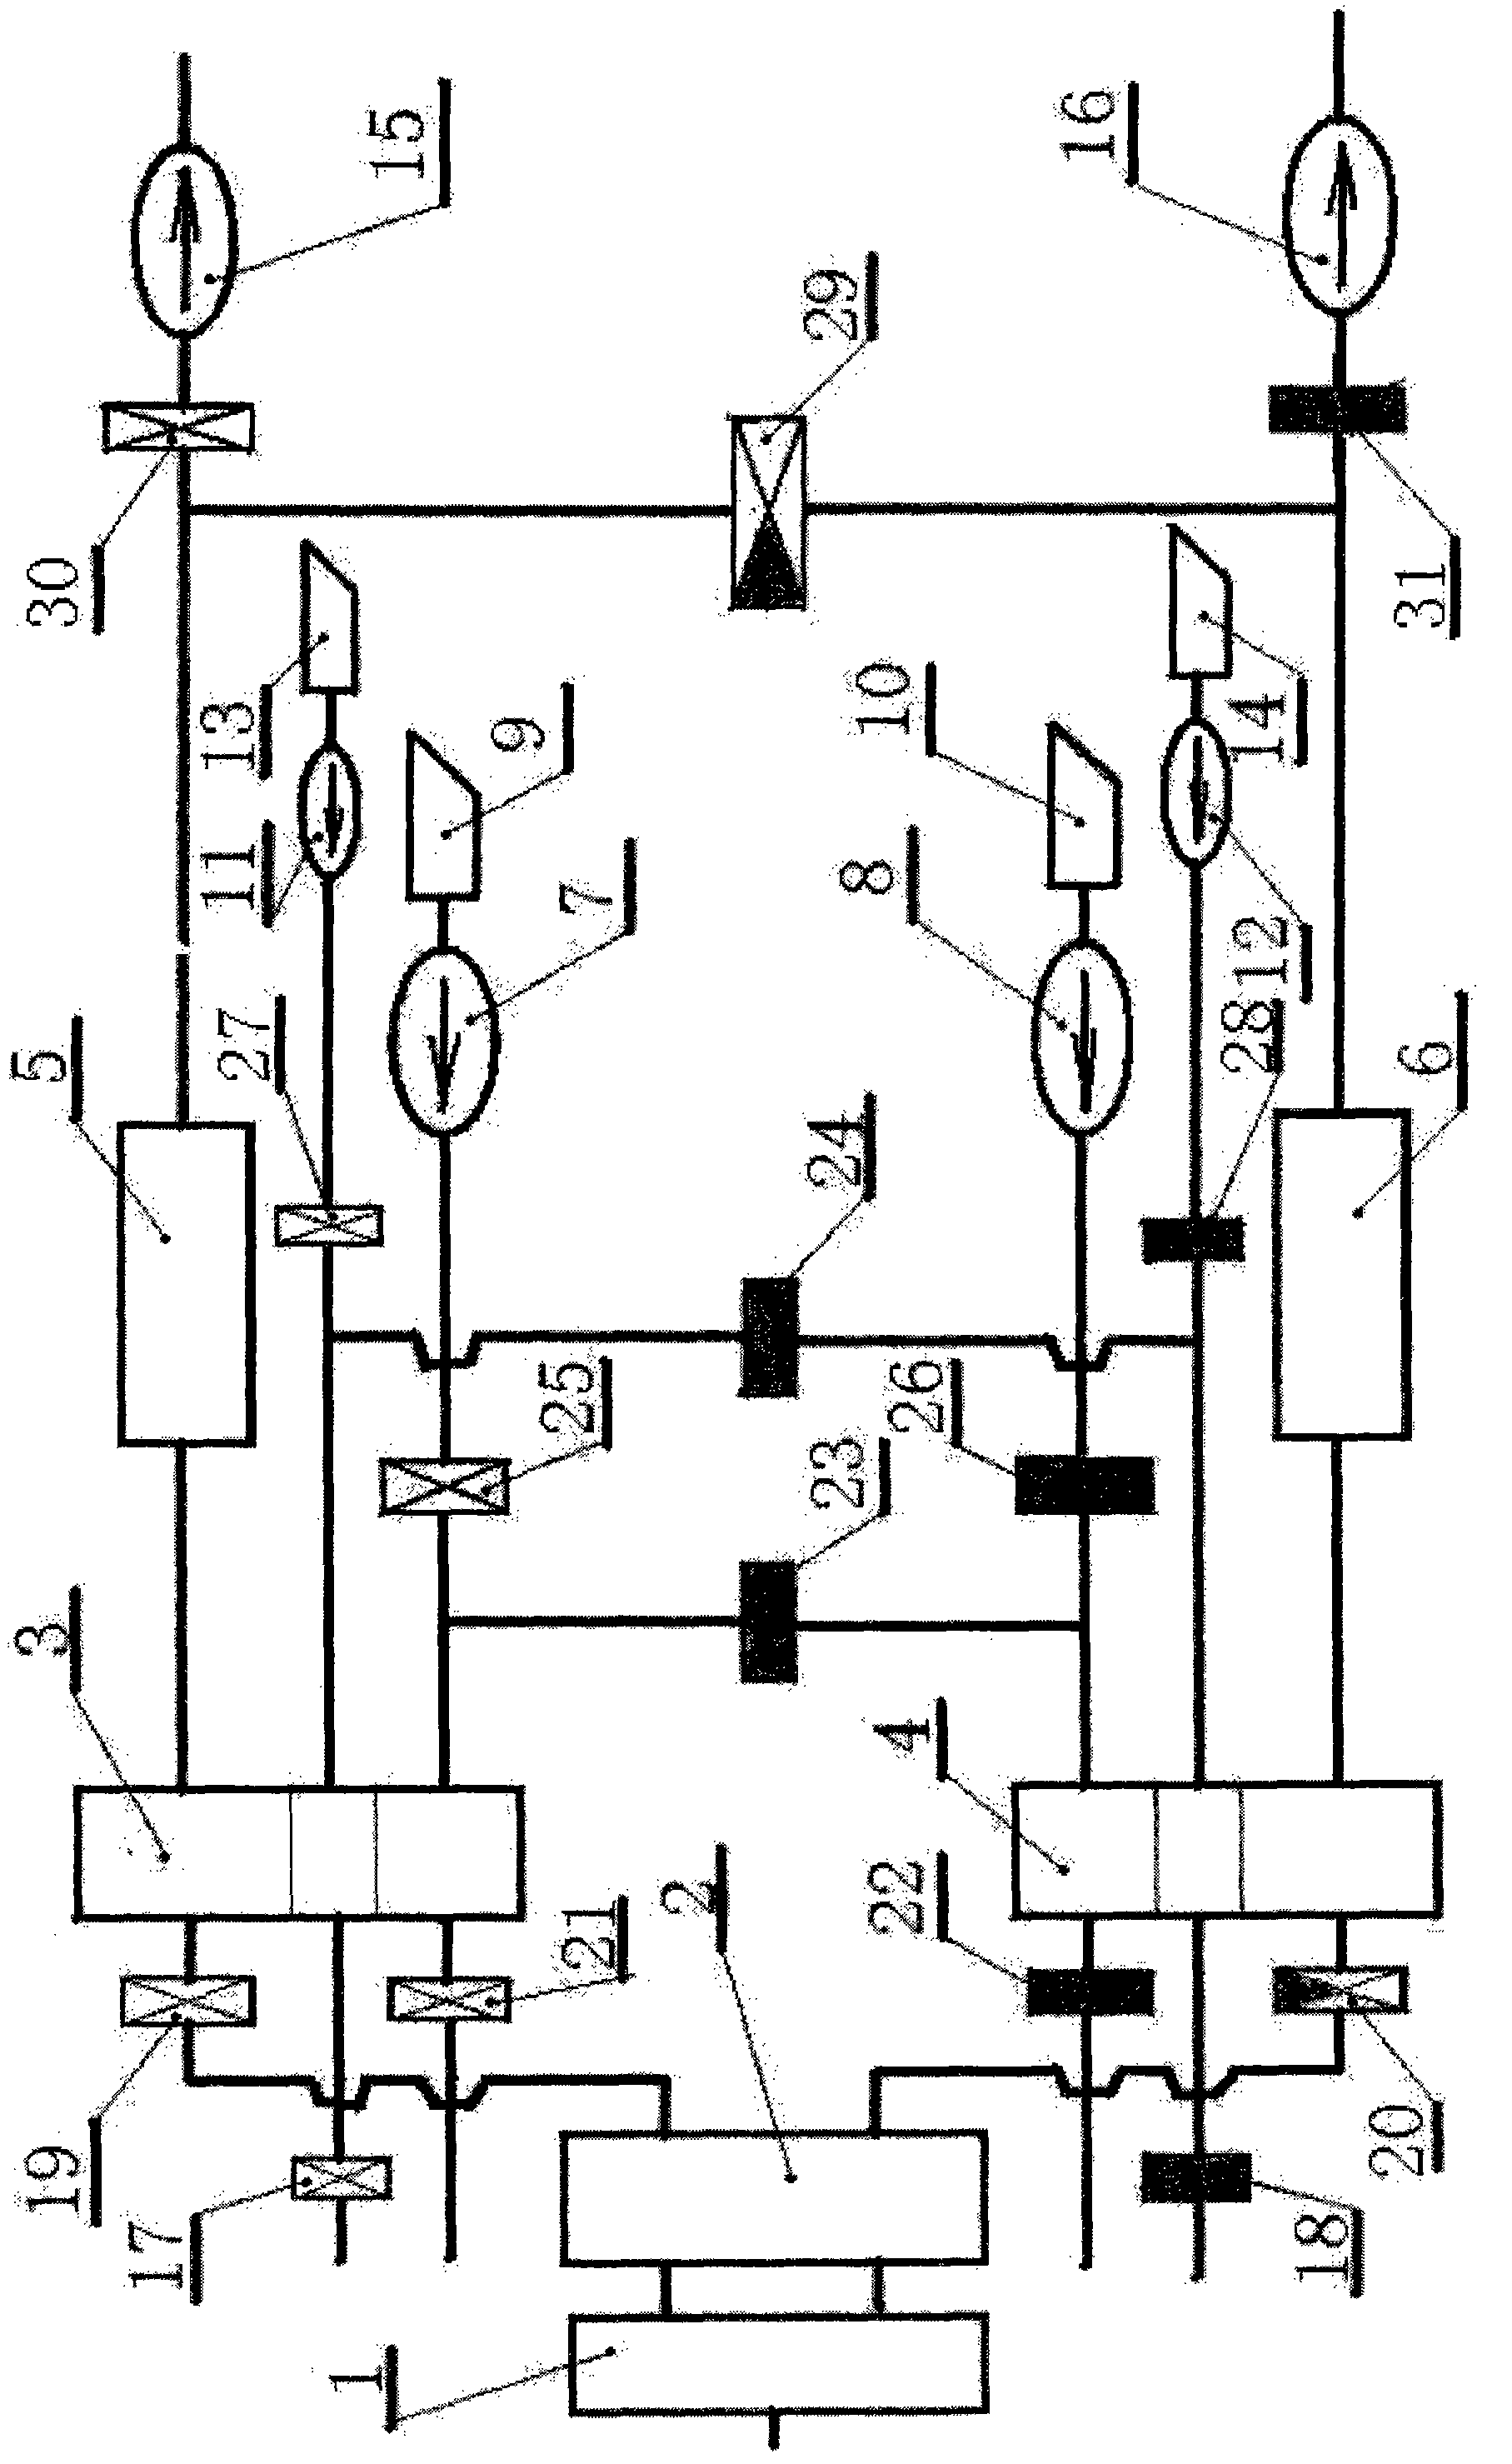 Side-to-side thermal deashing method for rotary air preheater